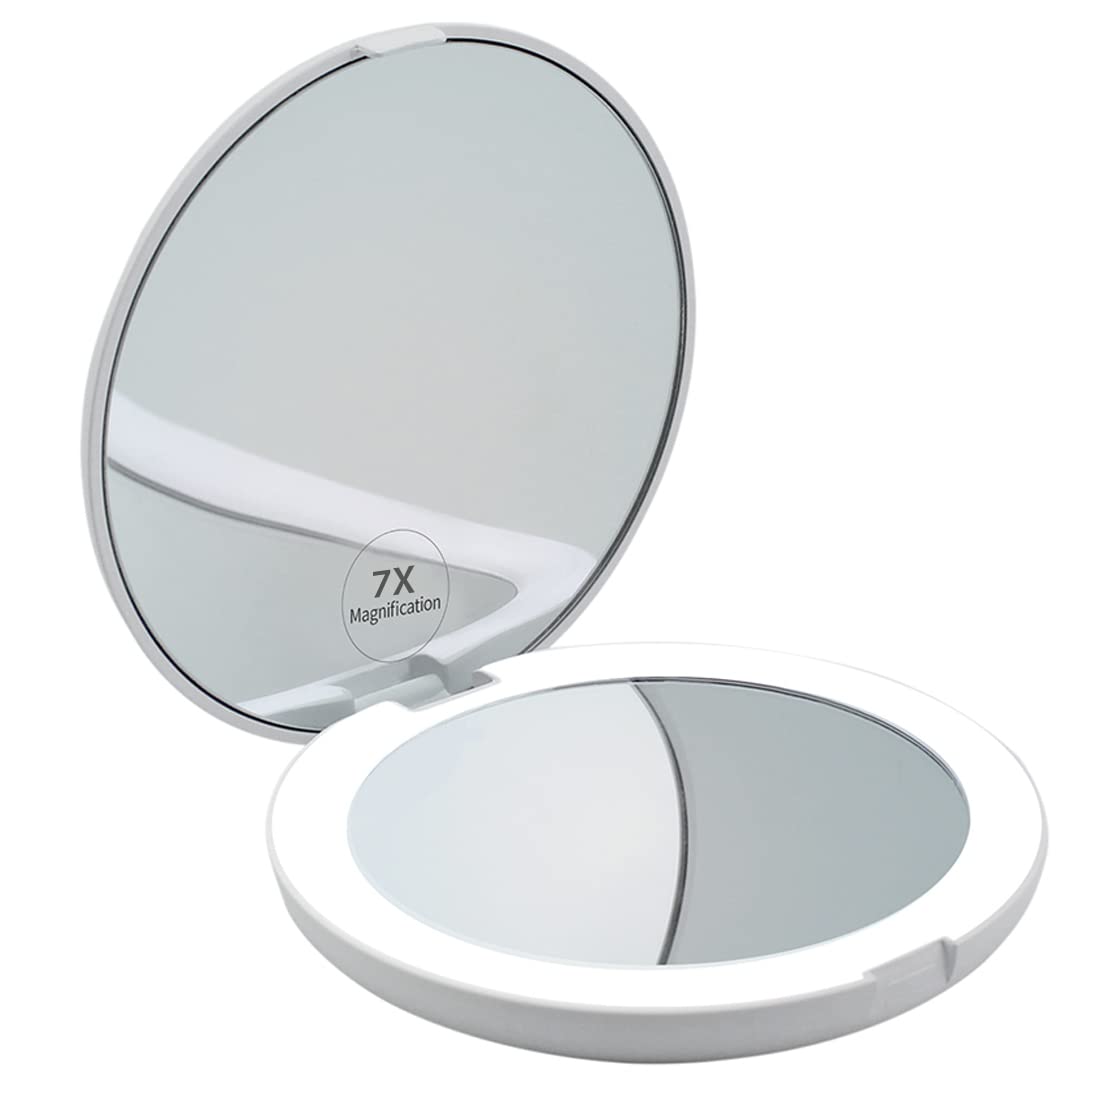 Led Compact Mirror, Rechargeable 1x/10x Magnification Compact Mirror,  Dimmable Small Travel Makeup Mirror, Pocket Mirror for Handbag, Purse,  Handheld 2-Sided Mirror, Gifts for Girls - Walmart.com